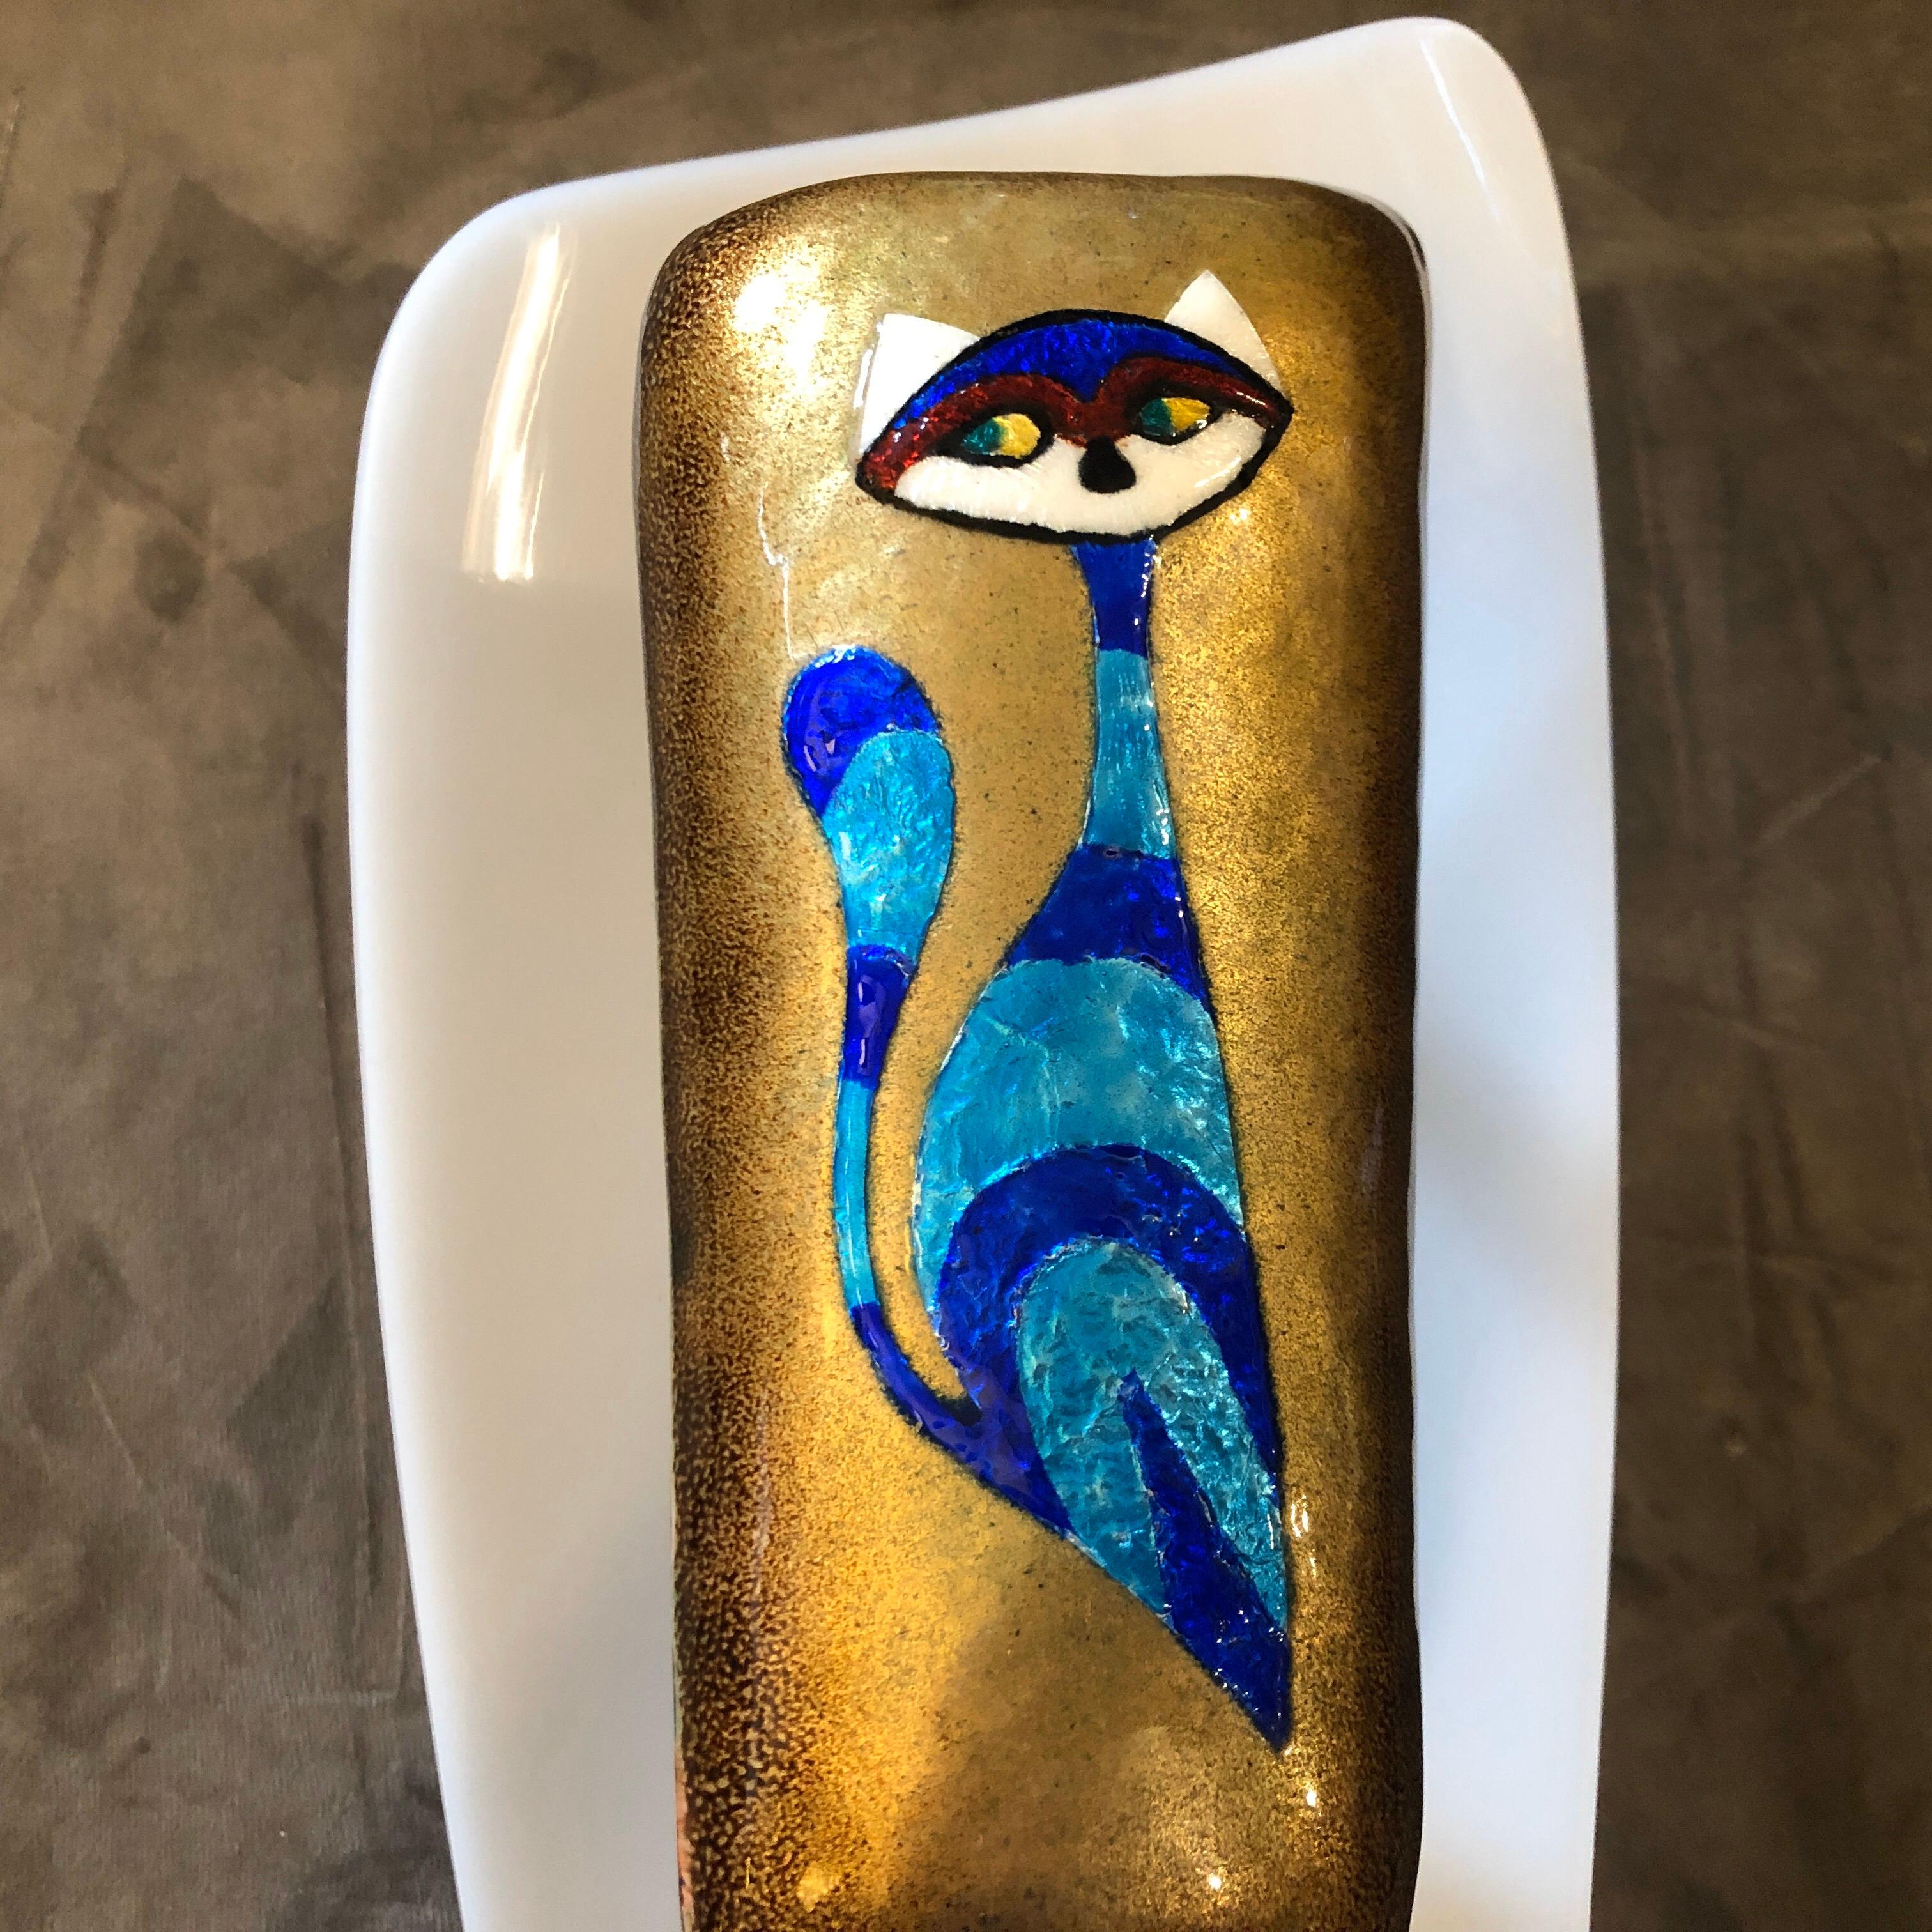 A rare enameled copper and plexiglass italian wall sconces made in the Sixties by Paolo De Poli, famous artist and producer that cooperates with Giò Ponti. Every sconce of Paolo de Poli it's an unique piece, this one depicting a blue cat.